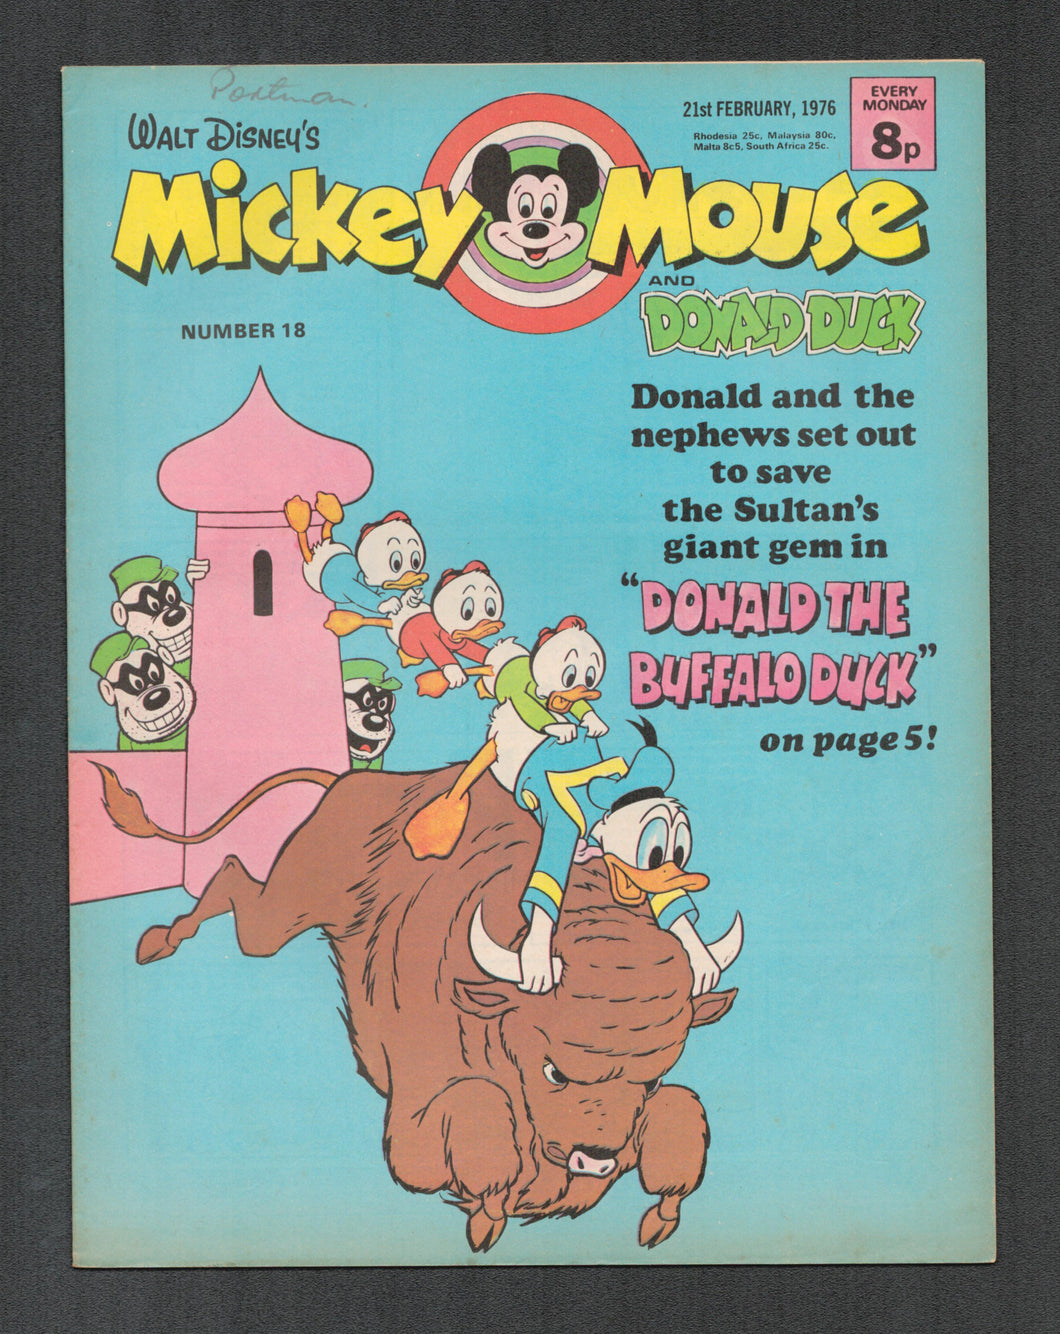 Mickey Mouse and Donald Duck No 18 Feb 21 1976